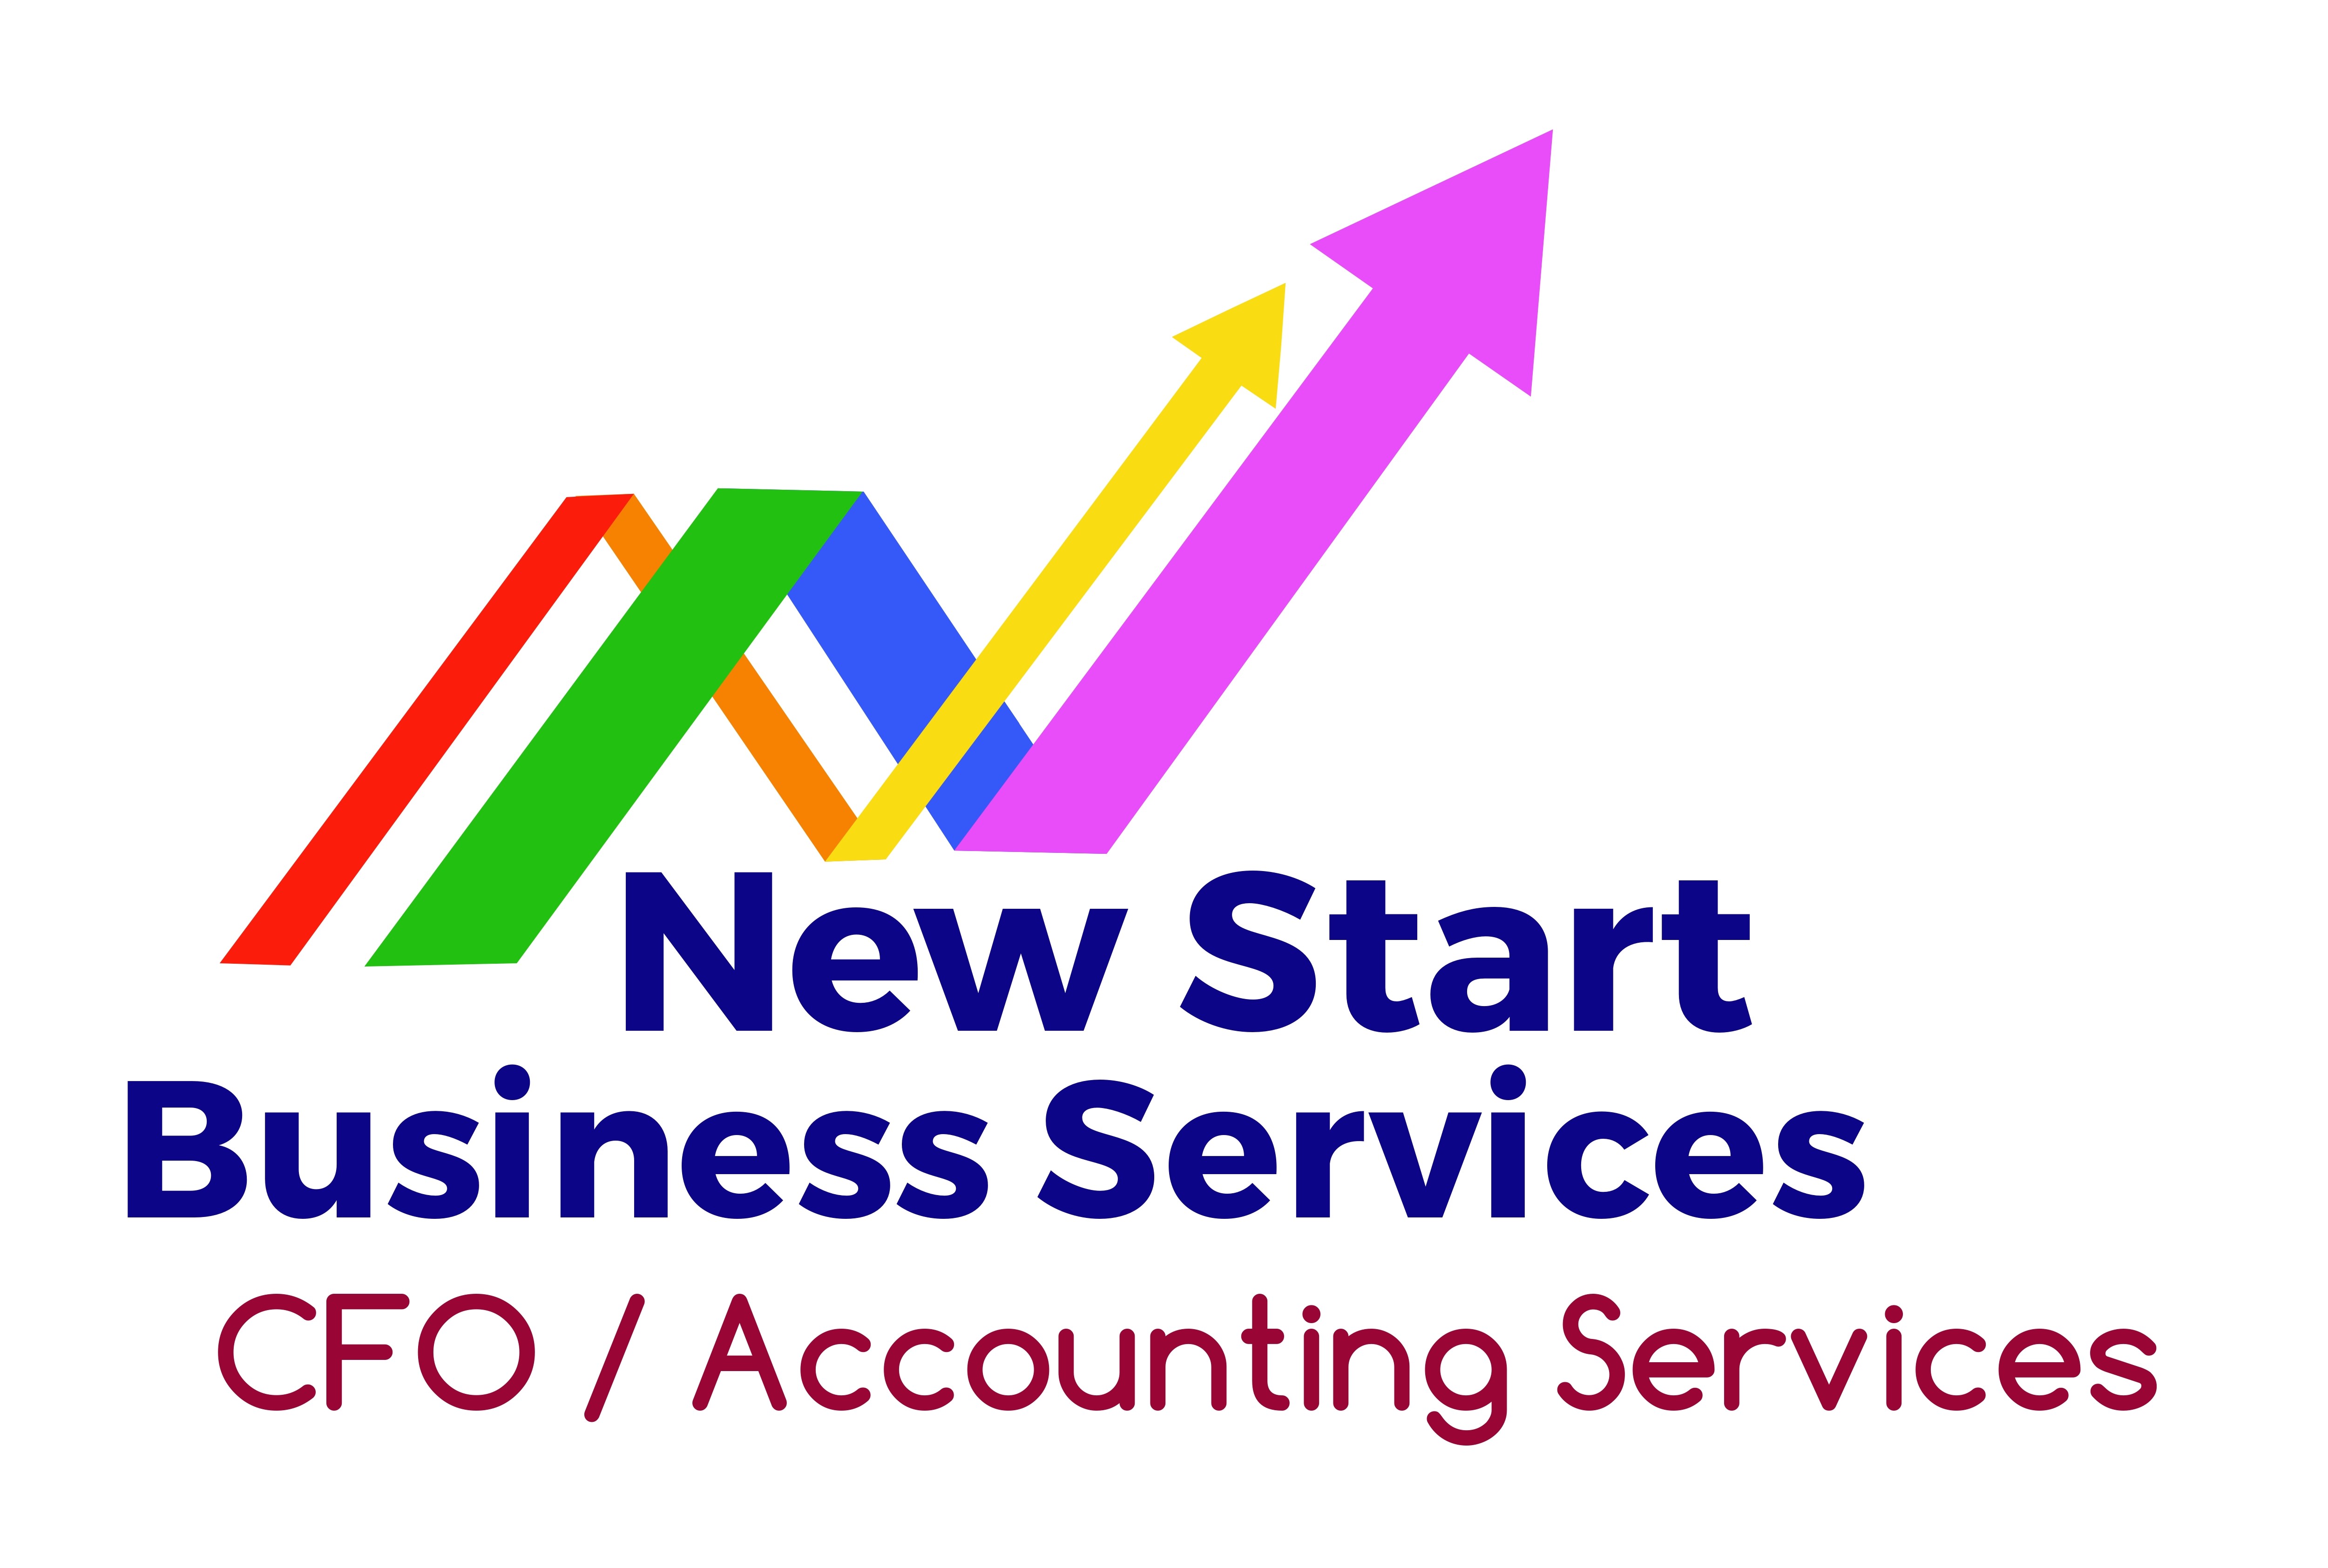 New Start Business Services